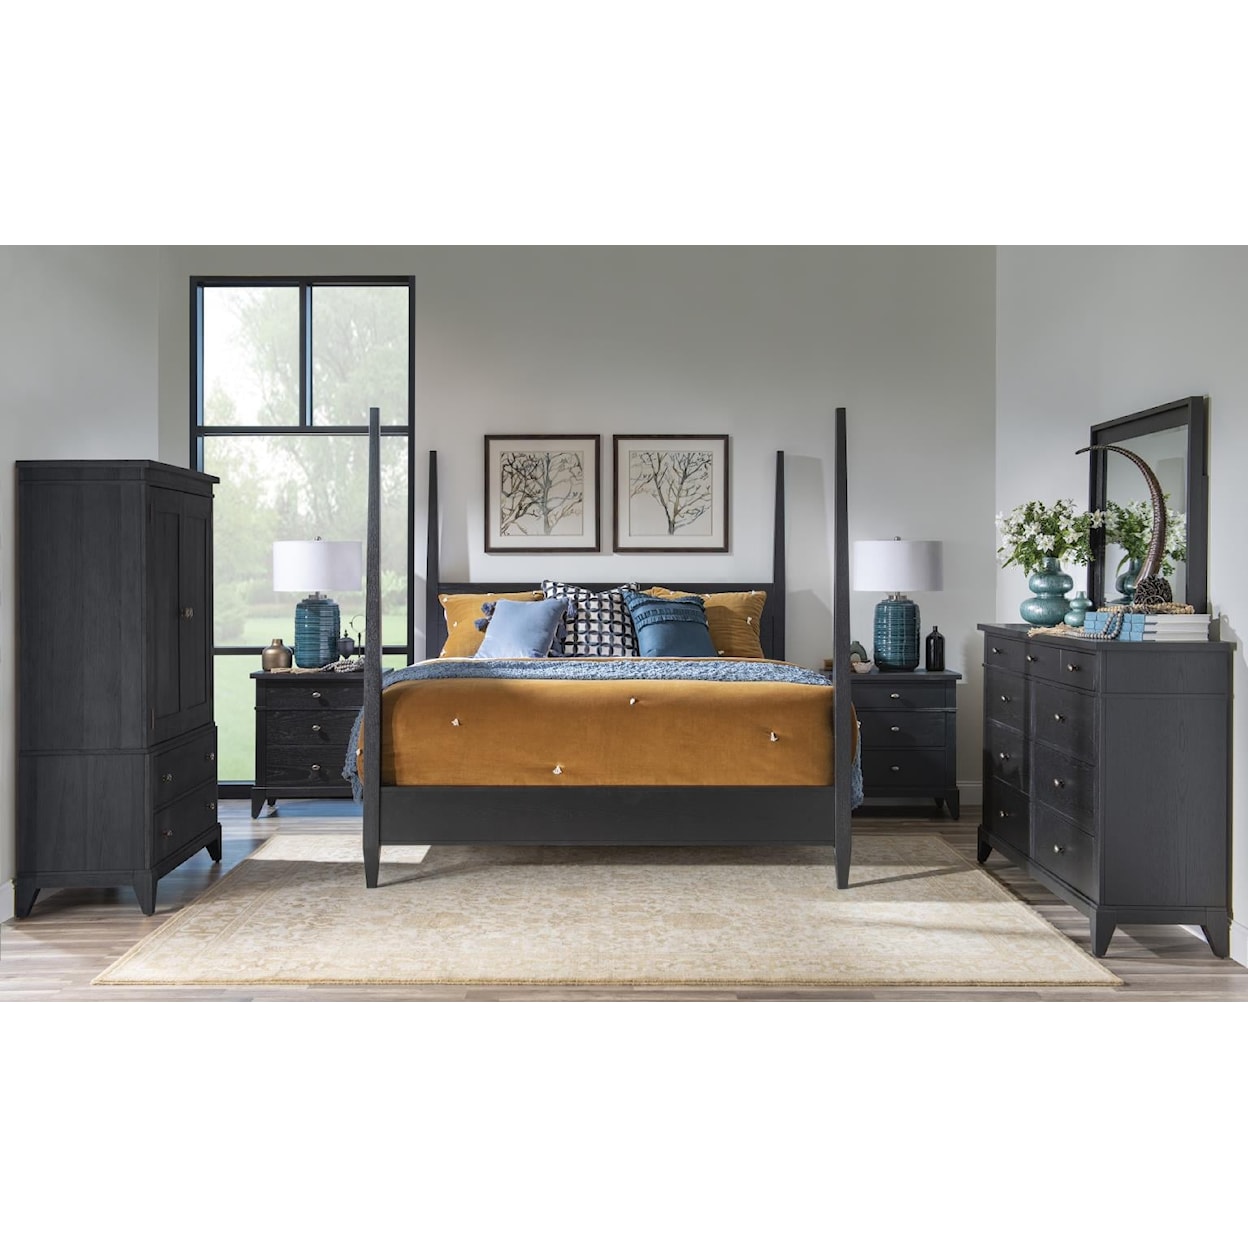 Trisha Yearwood Home Collection by Legacy Classic Today's Traditions Queen Poster Bed